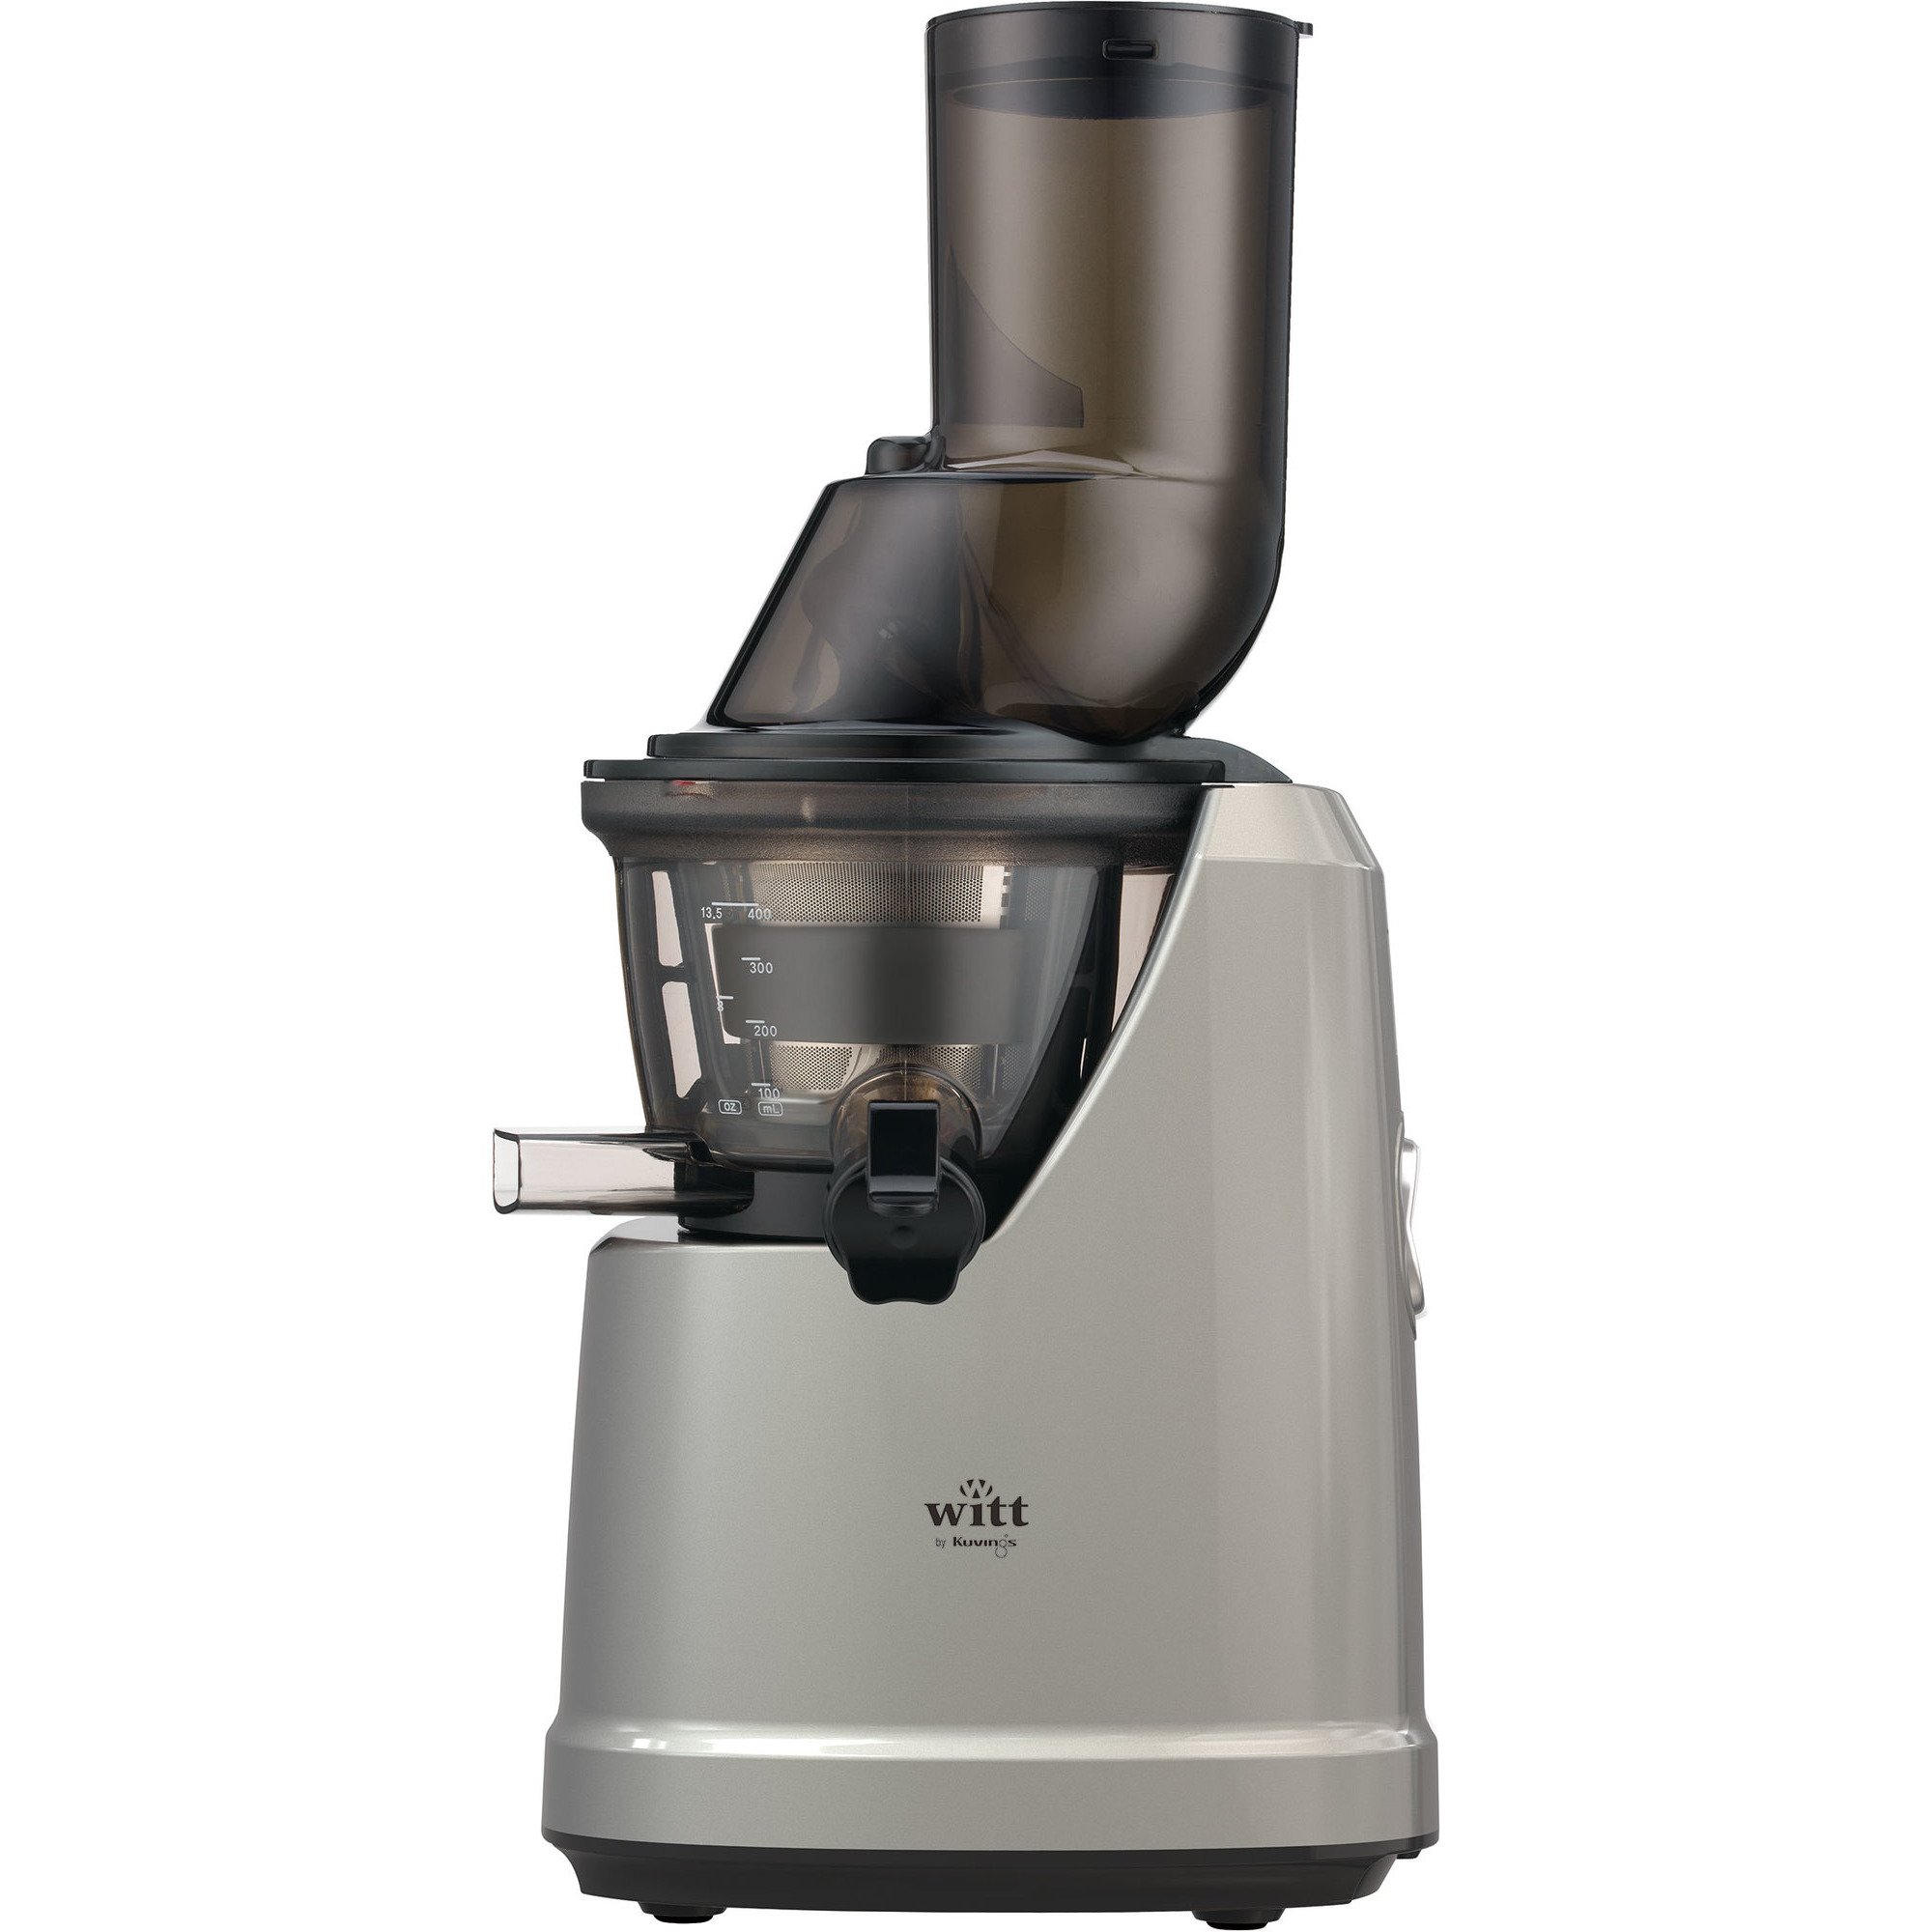 Witt by Kuvings B6200S Whole slowjuicer